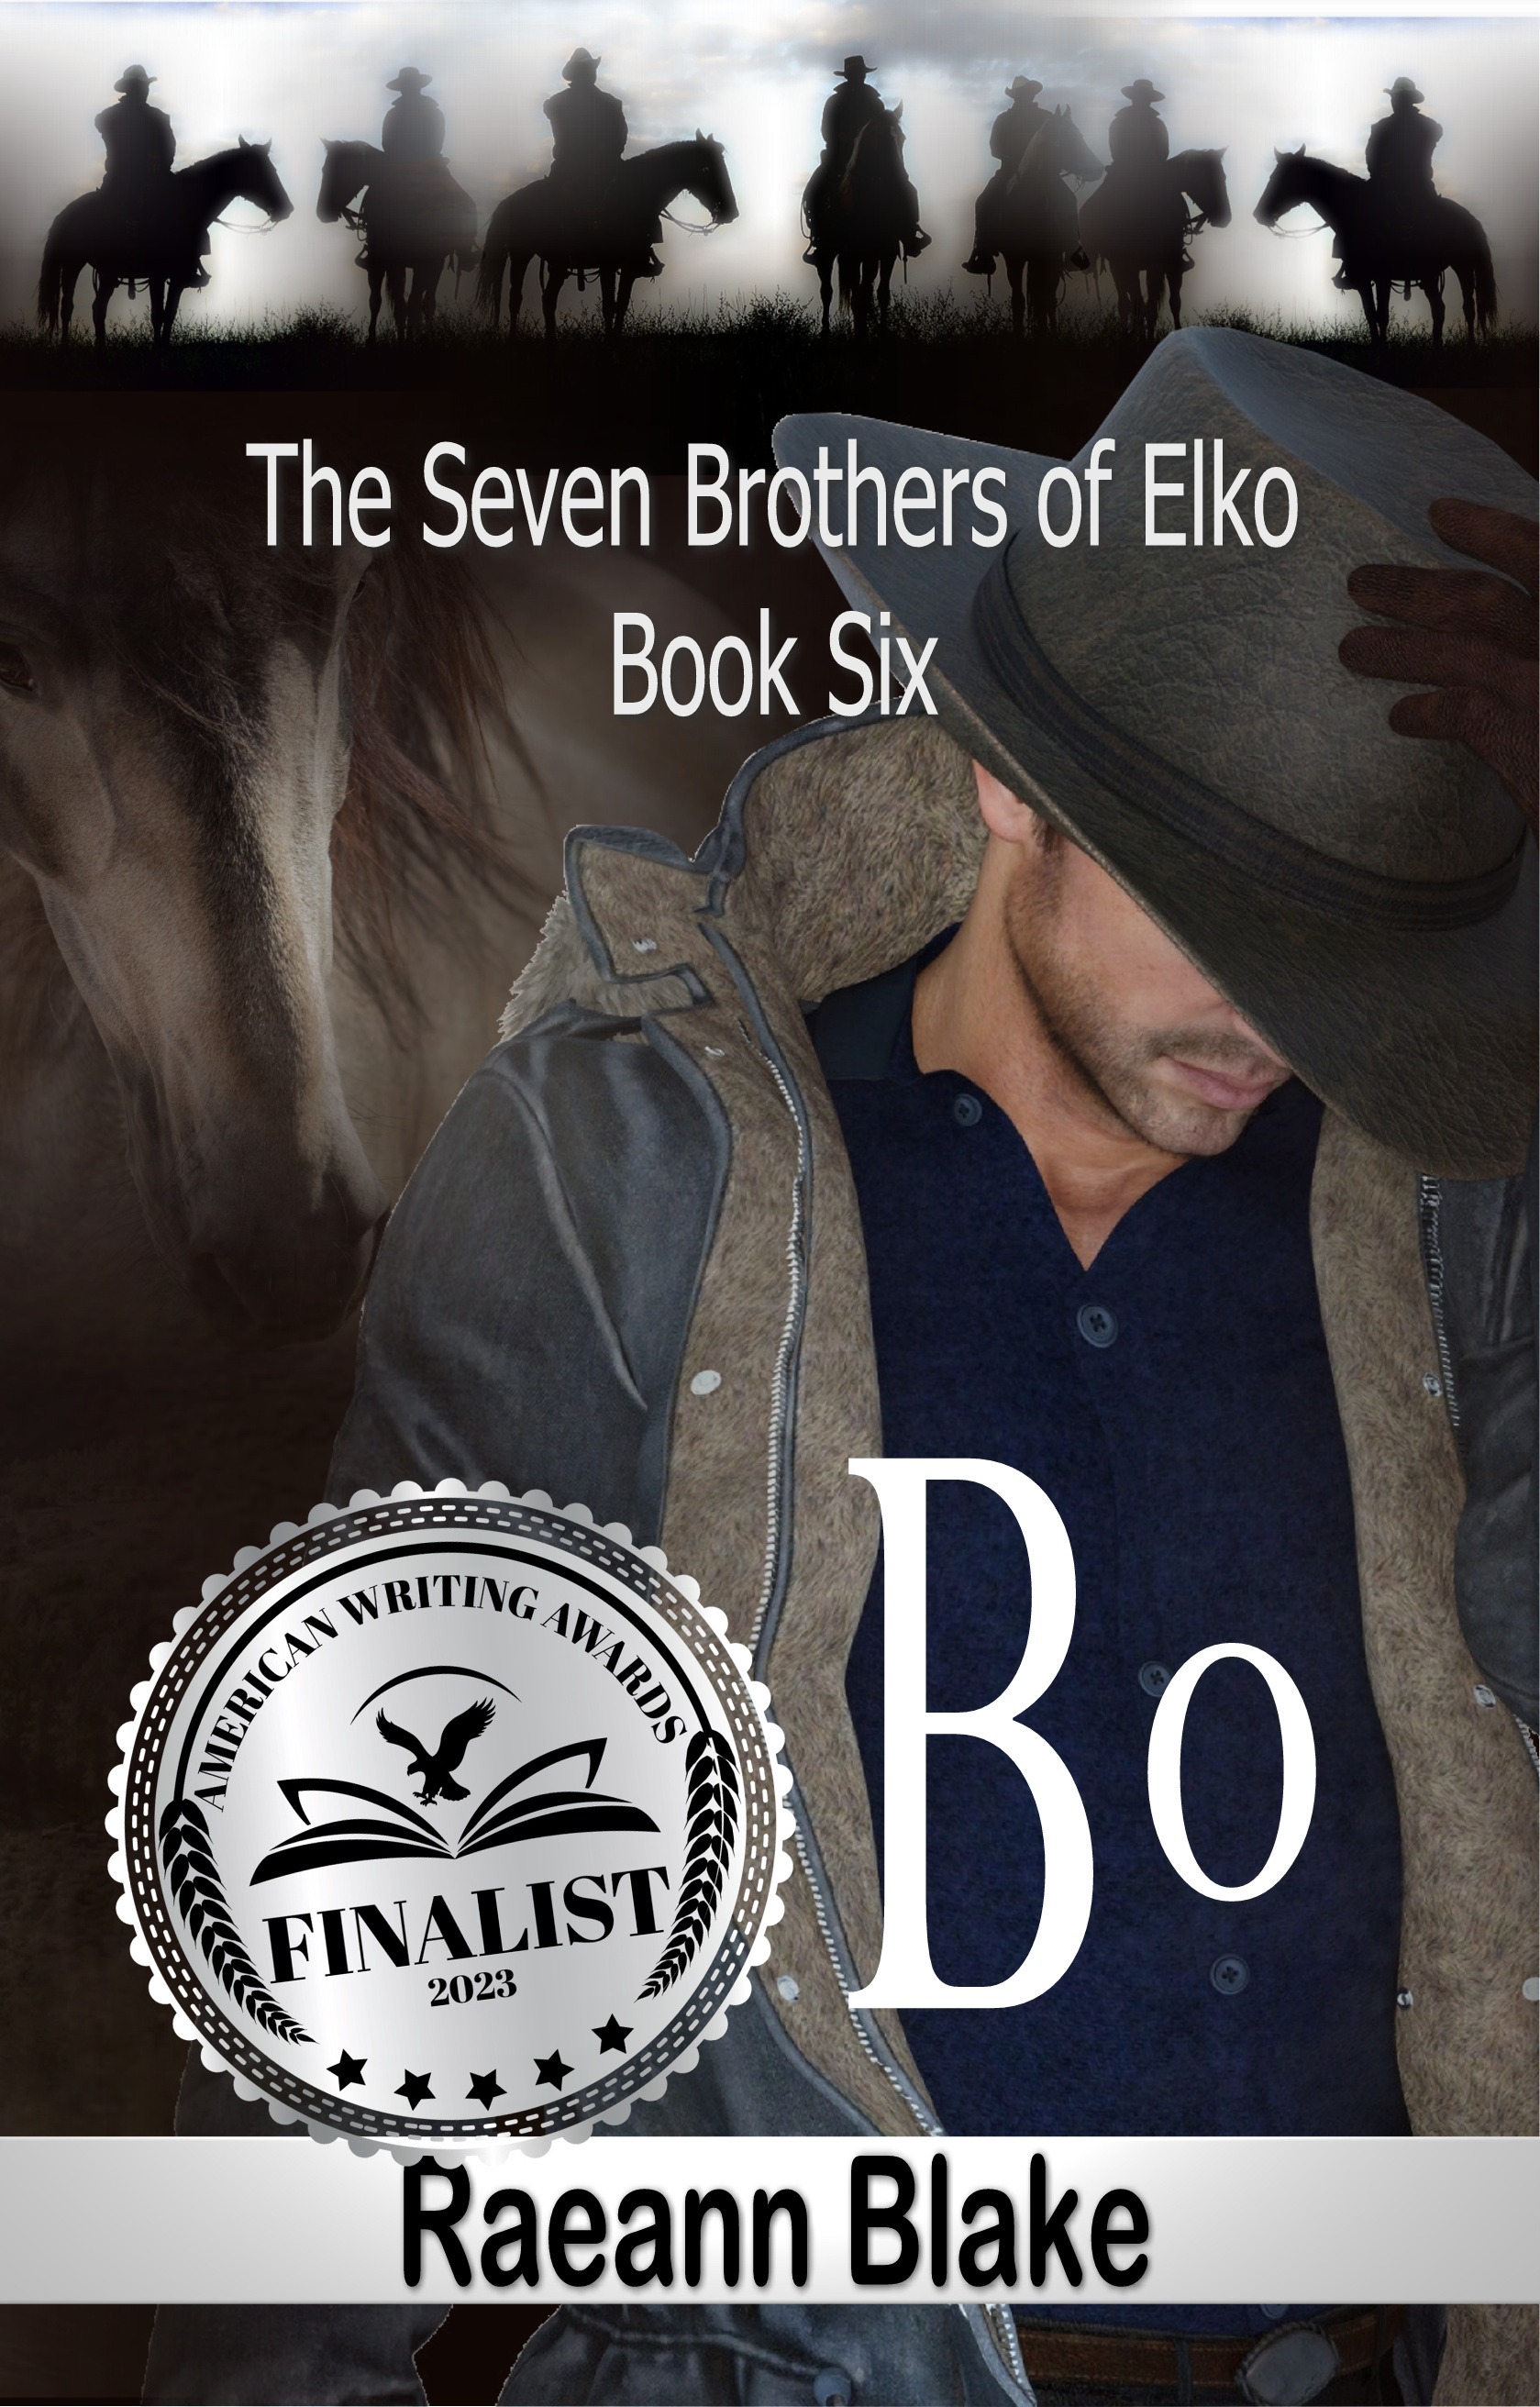 The Seven Brothers of Elko - Bo